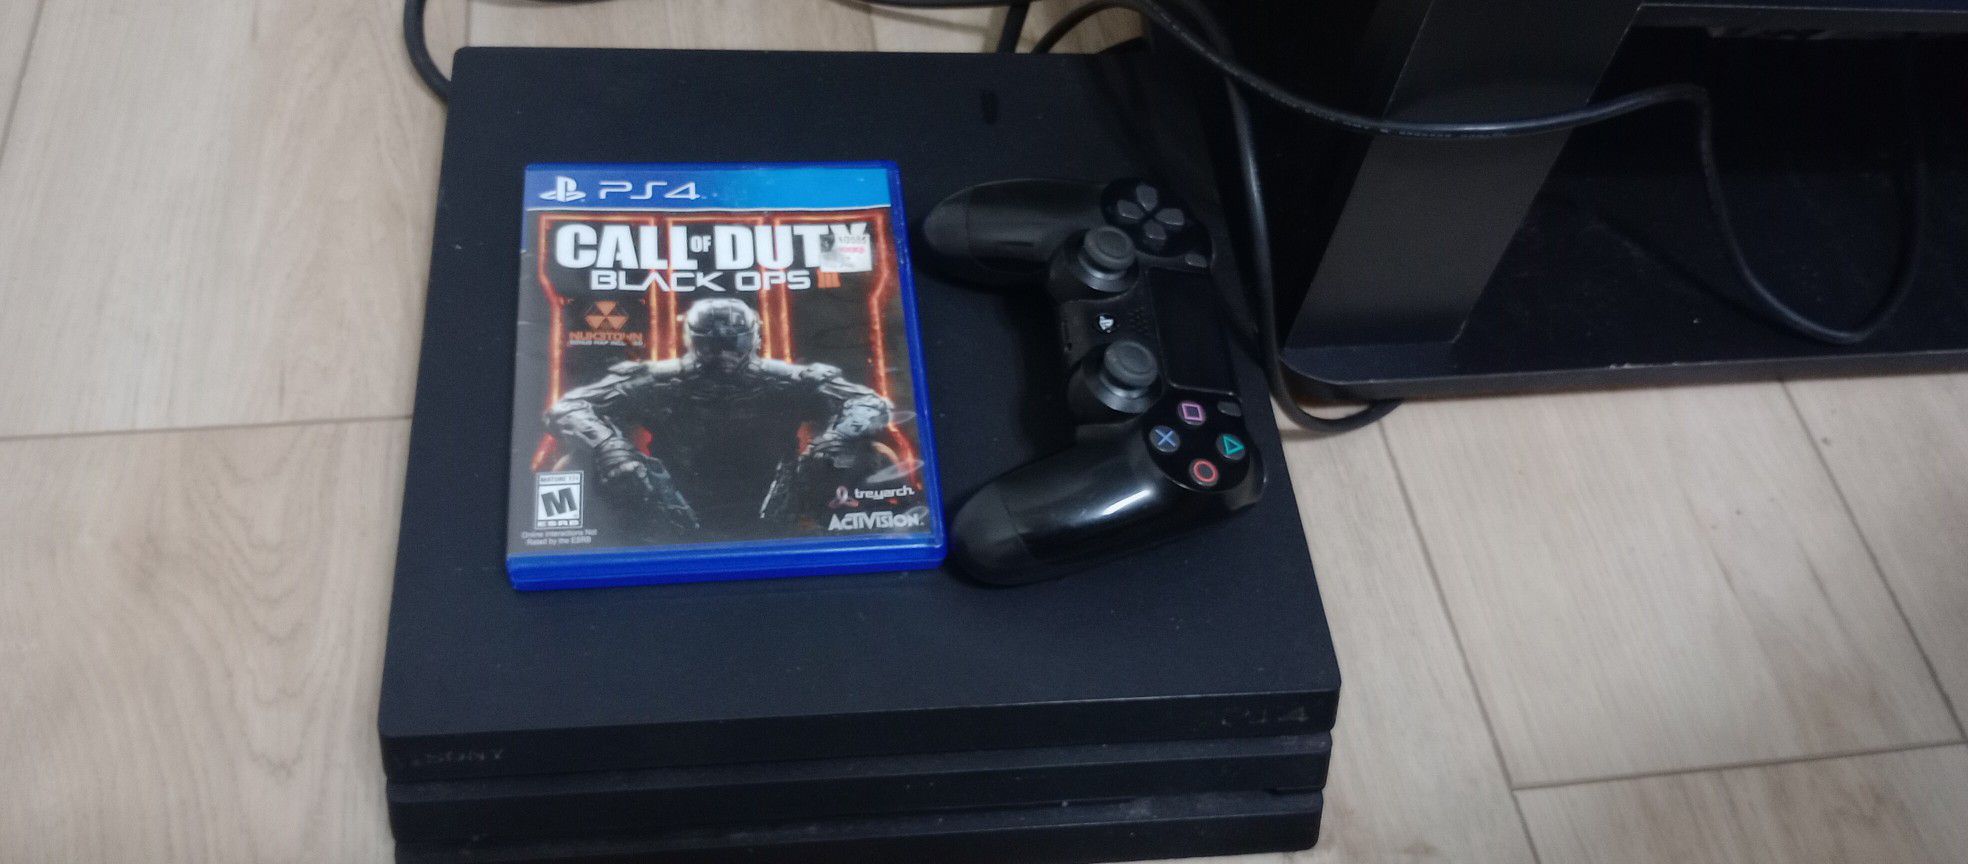 PS4 Pro + Black Ops 3